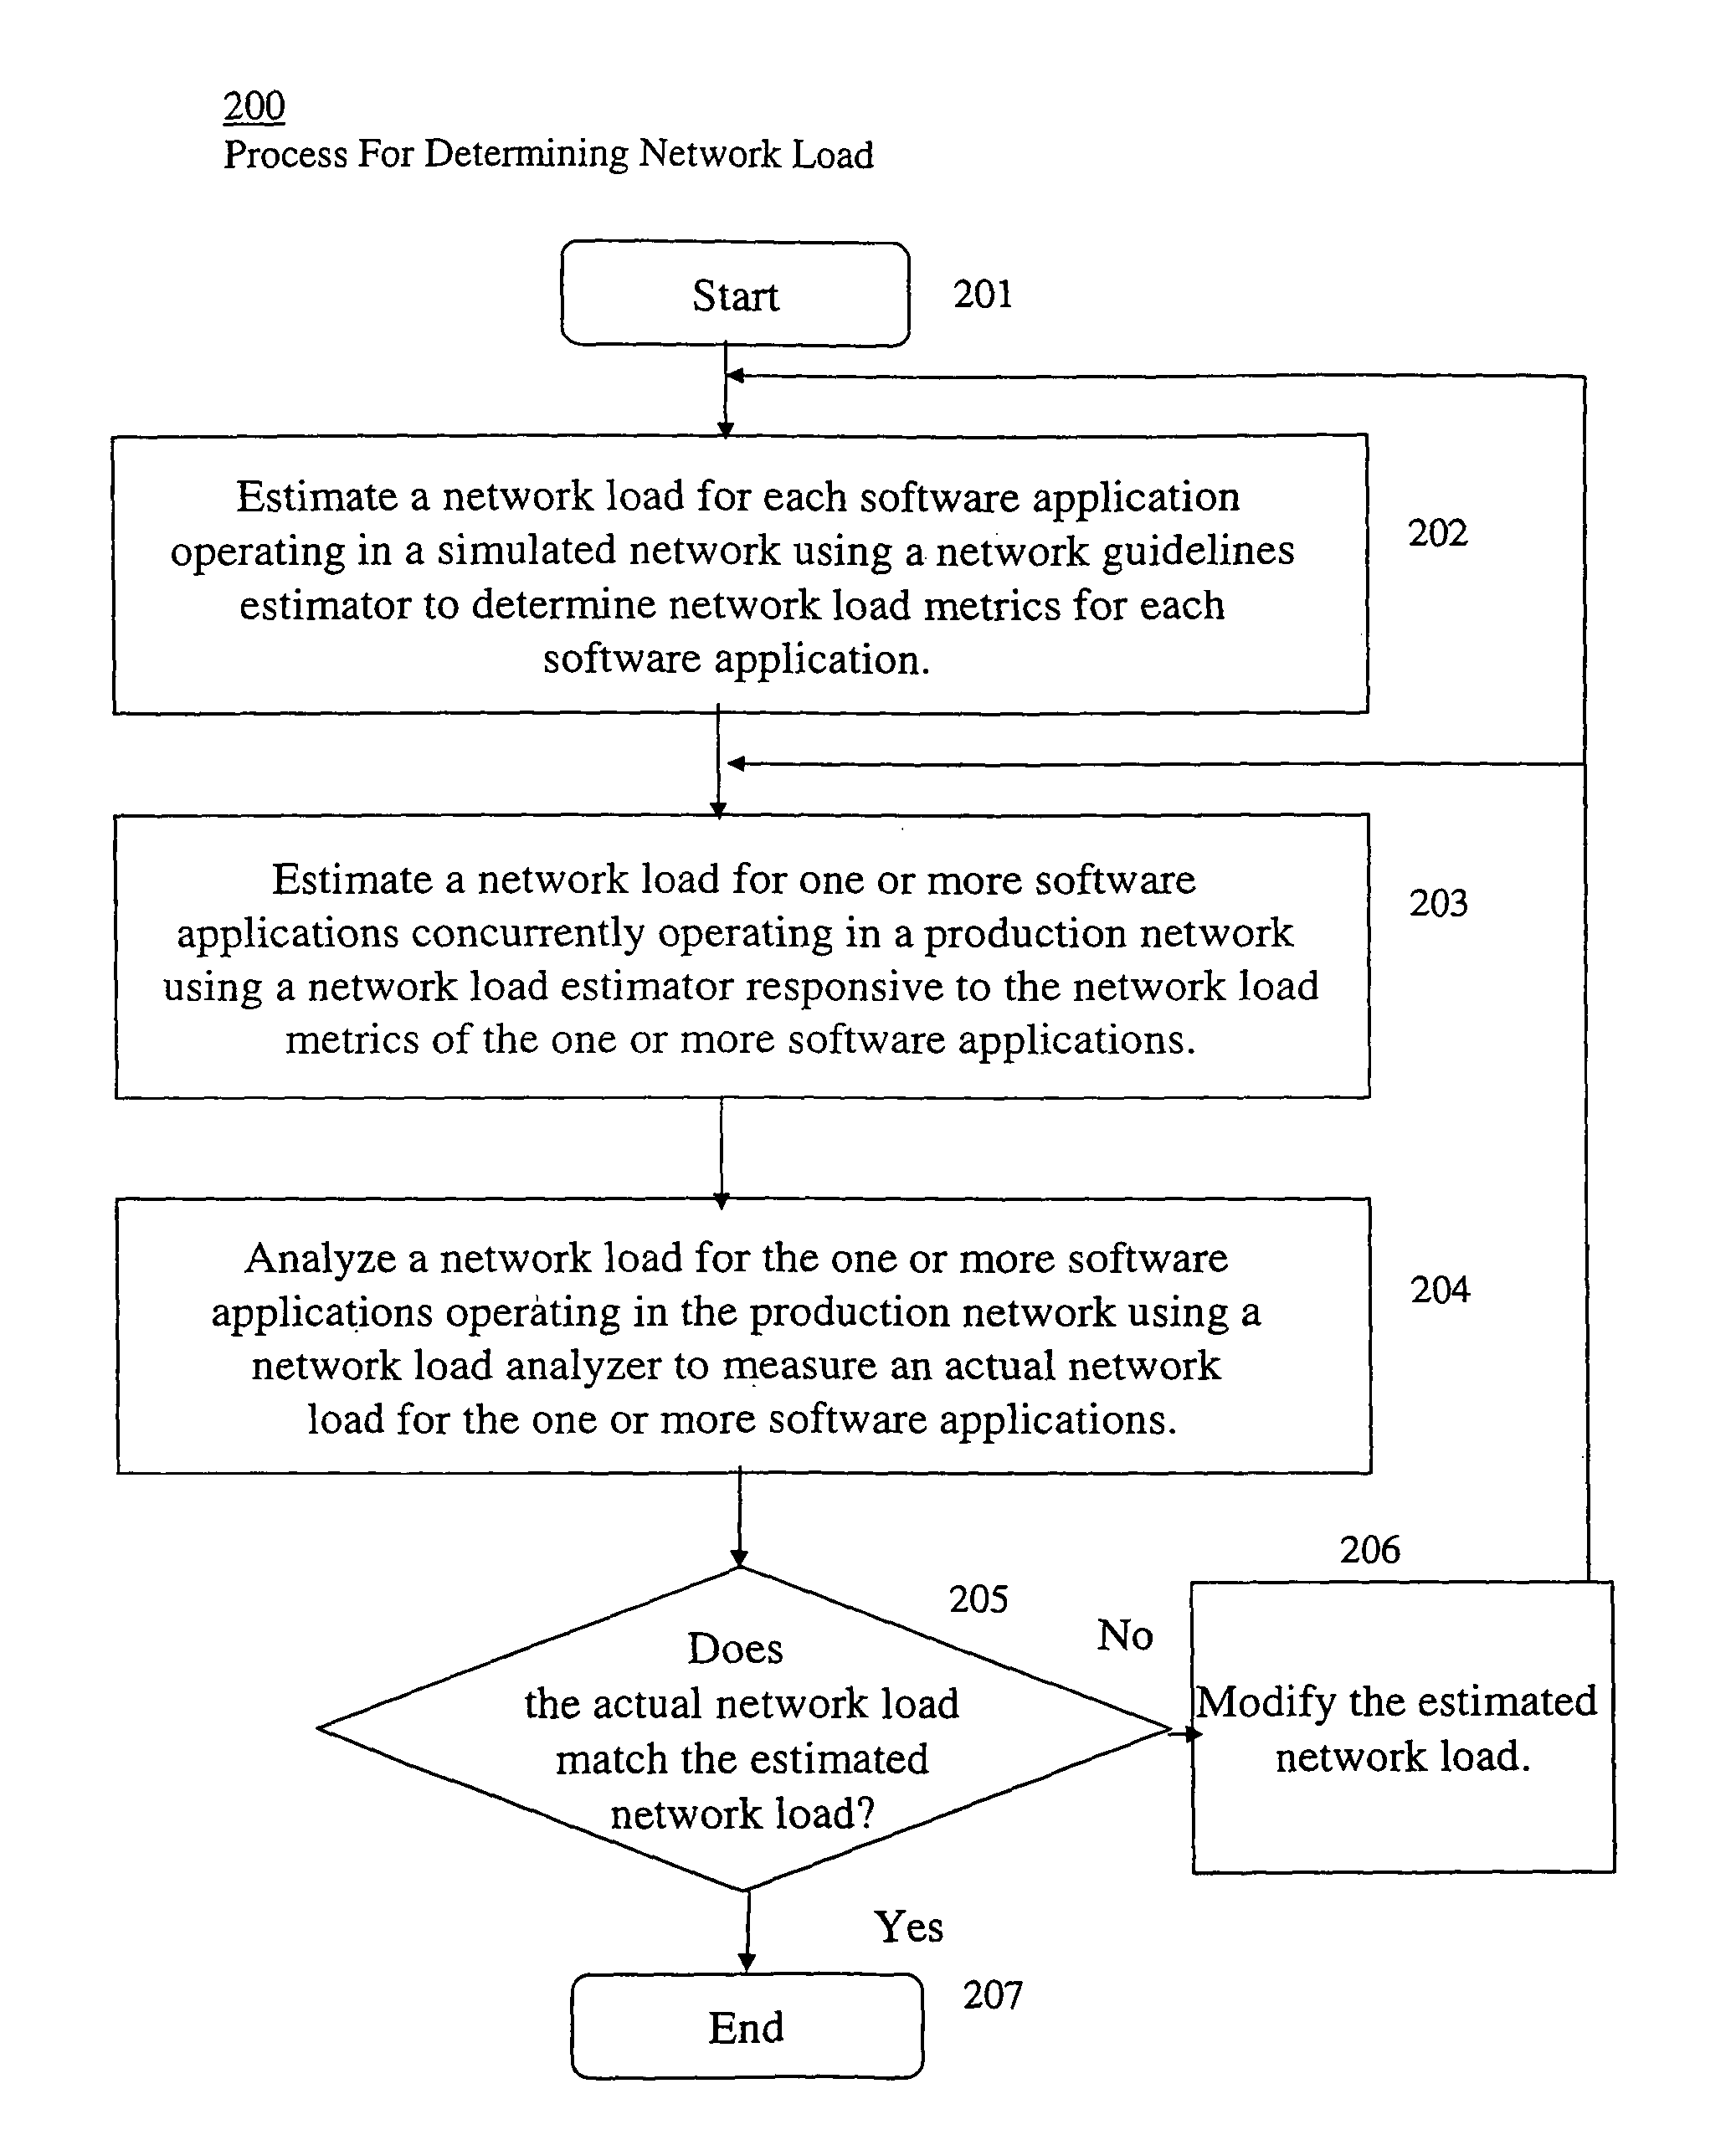 Executable application network impact and load characteristic estimation system